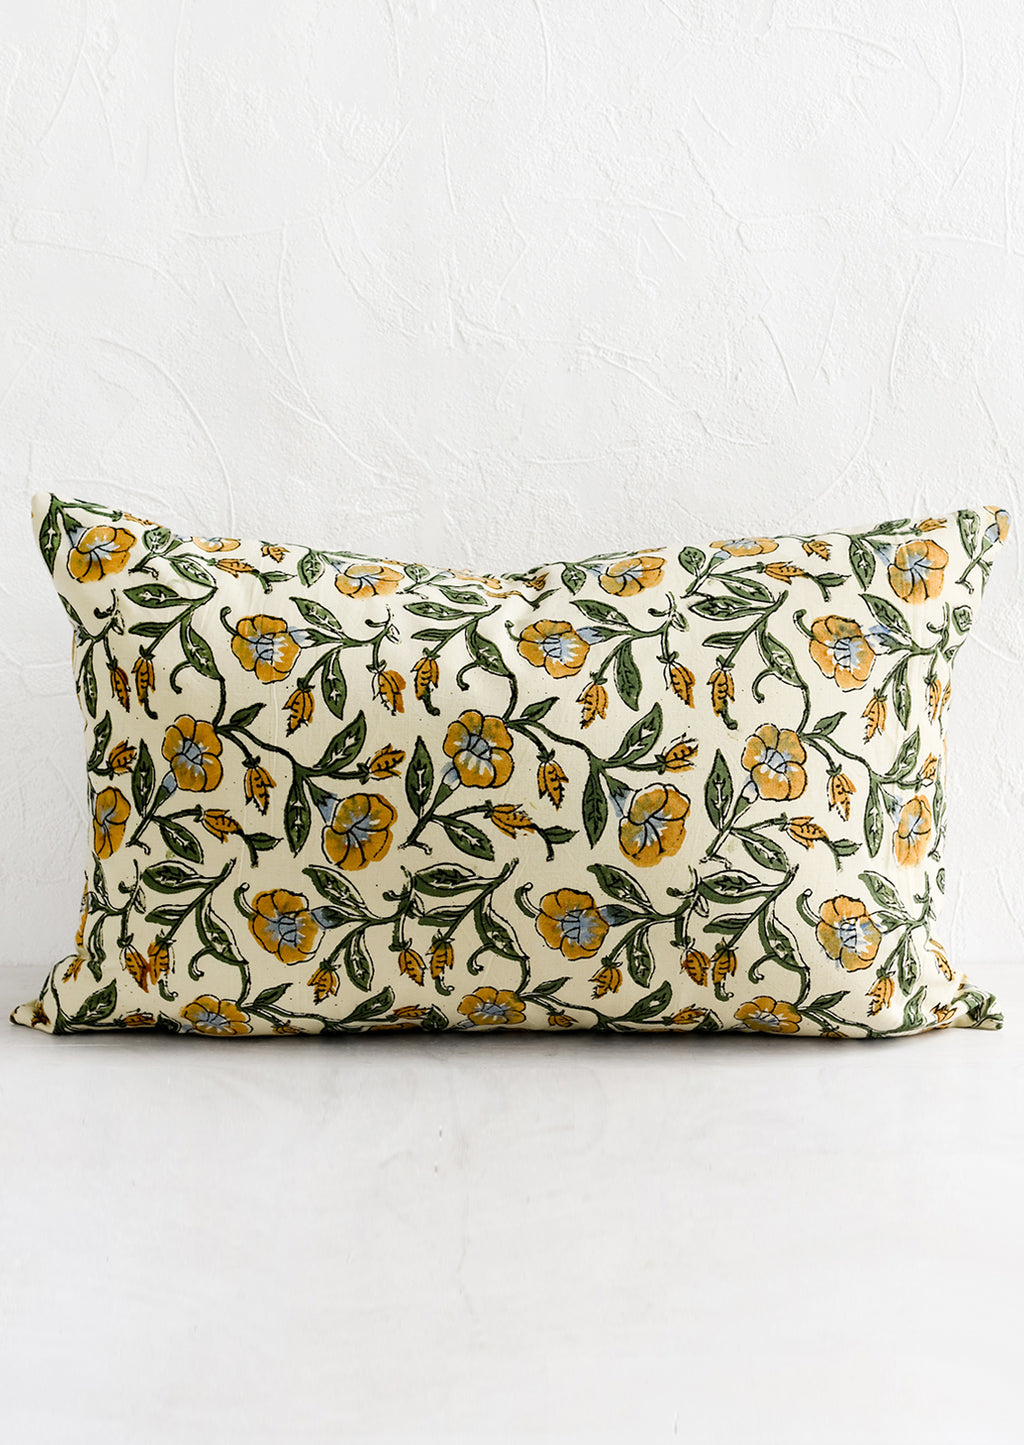 1: A lumbar pillow in beige, mustard, blue and green floral print.